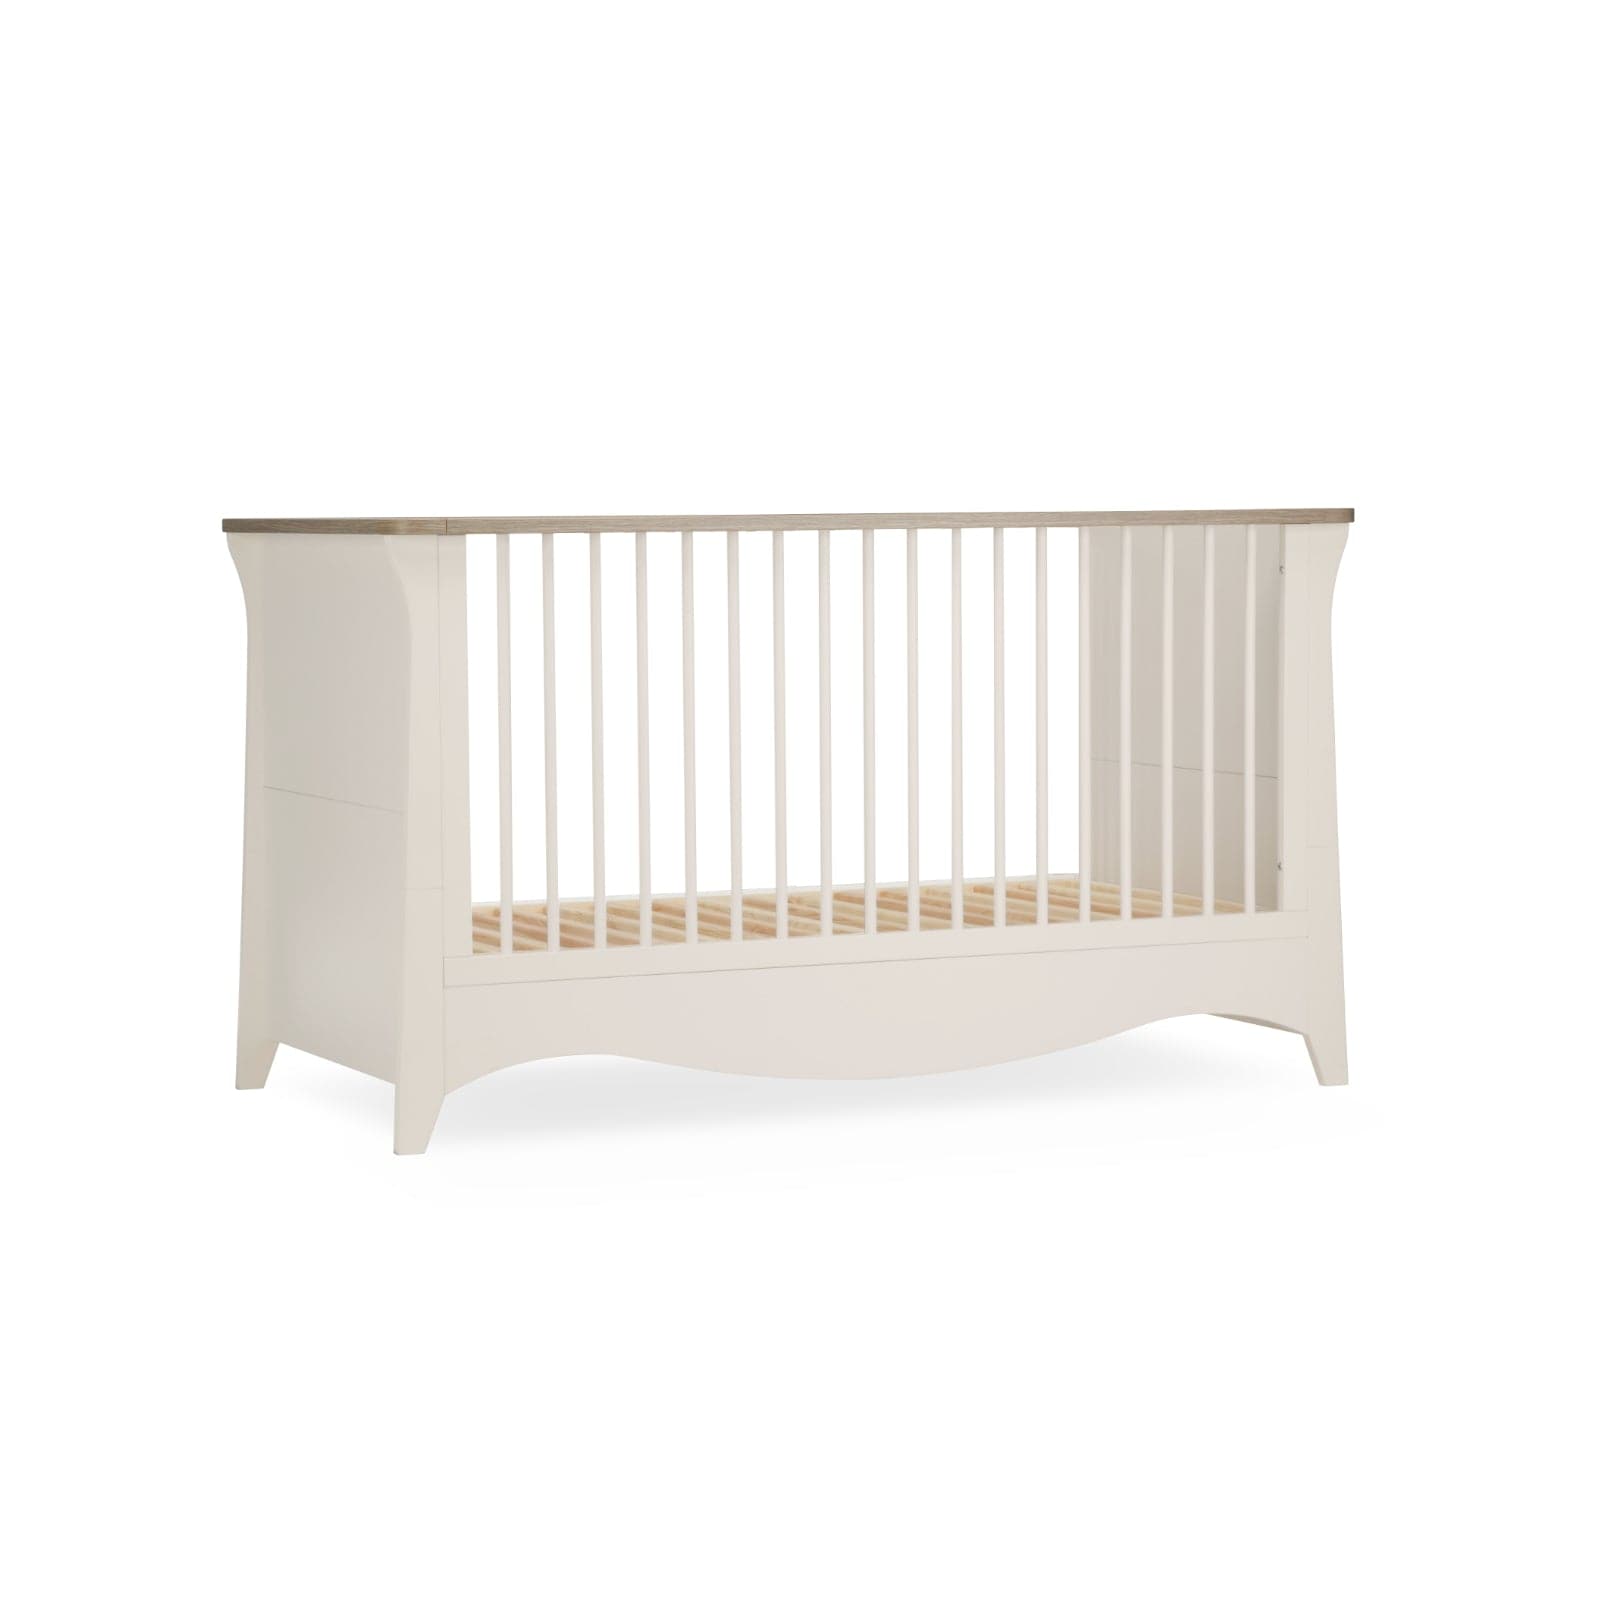 CuddleCo Clara Cot Bed in Cashmere Cot Beds